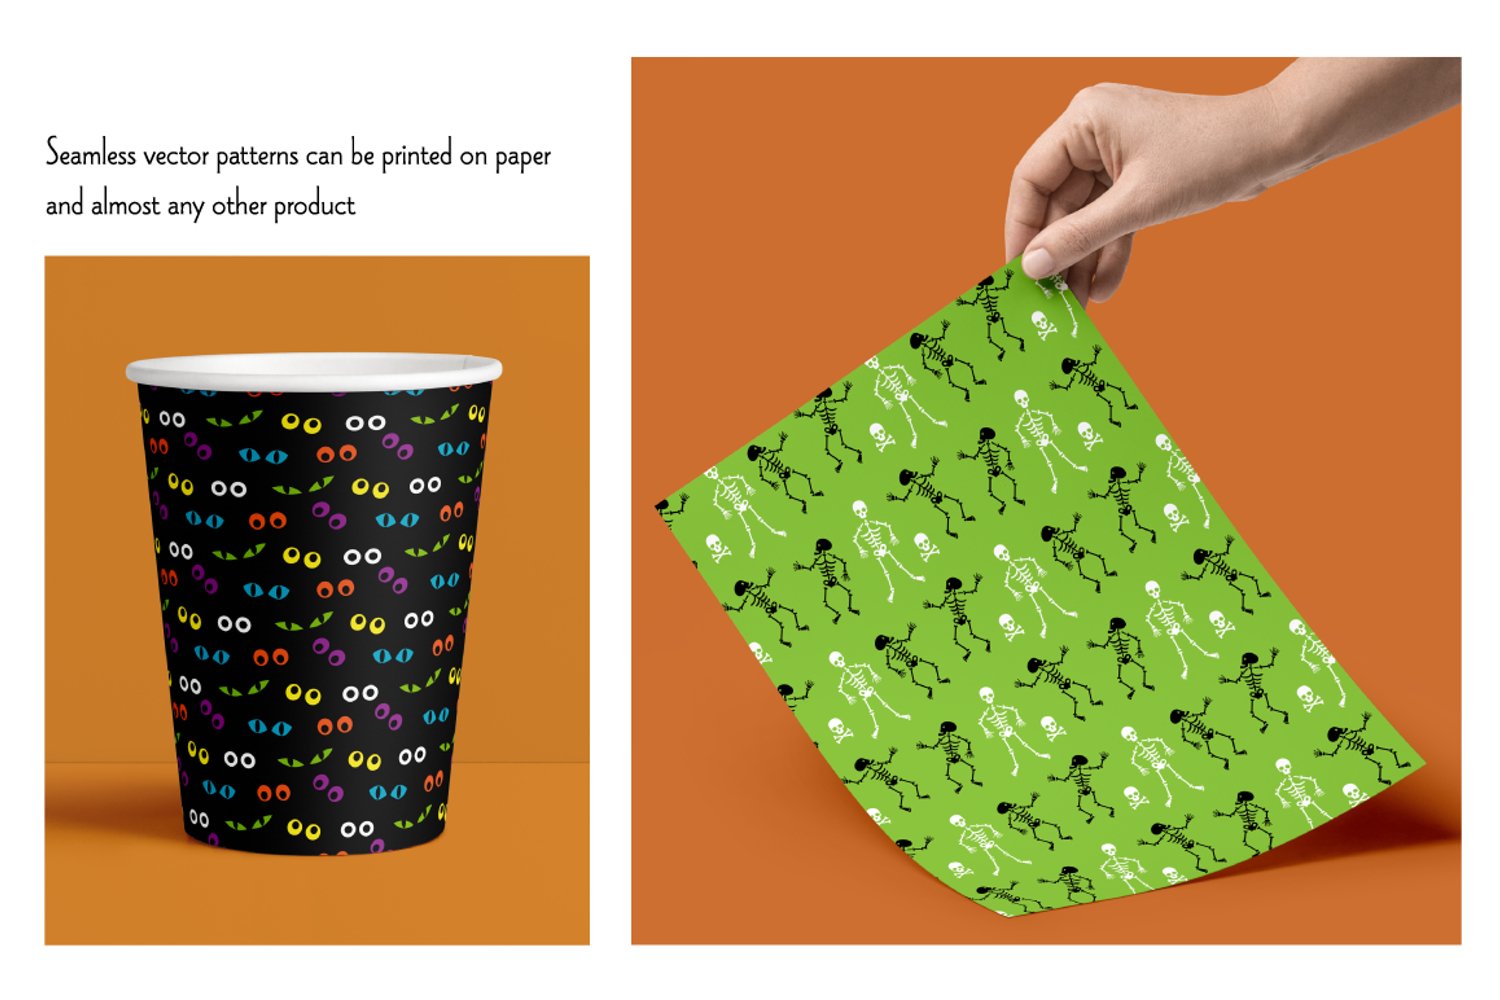 Seamless patterns can be printed on paper and almost any other product.